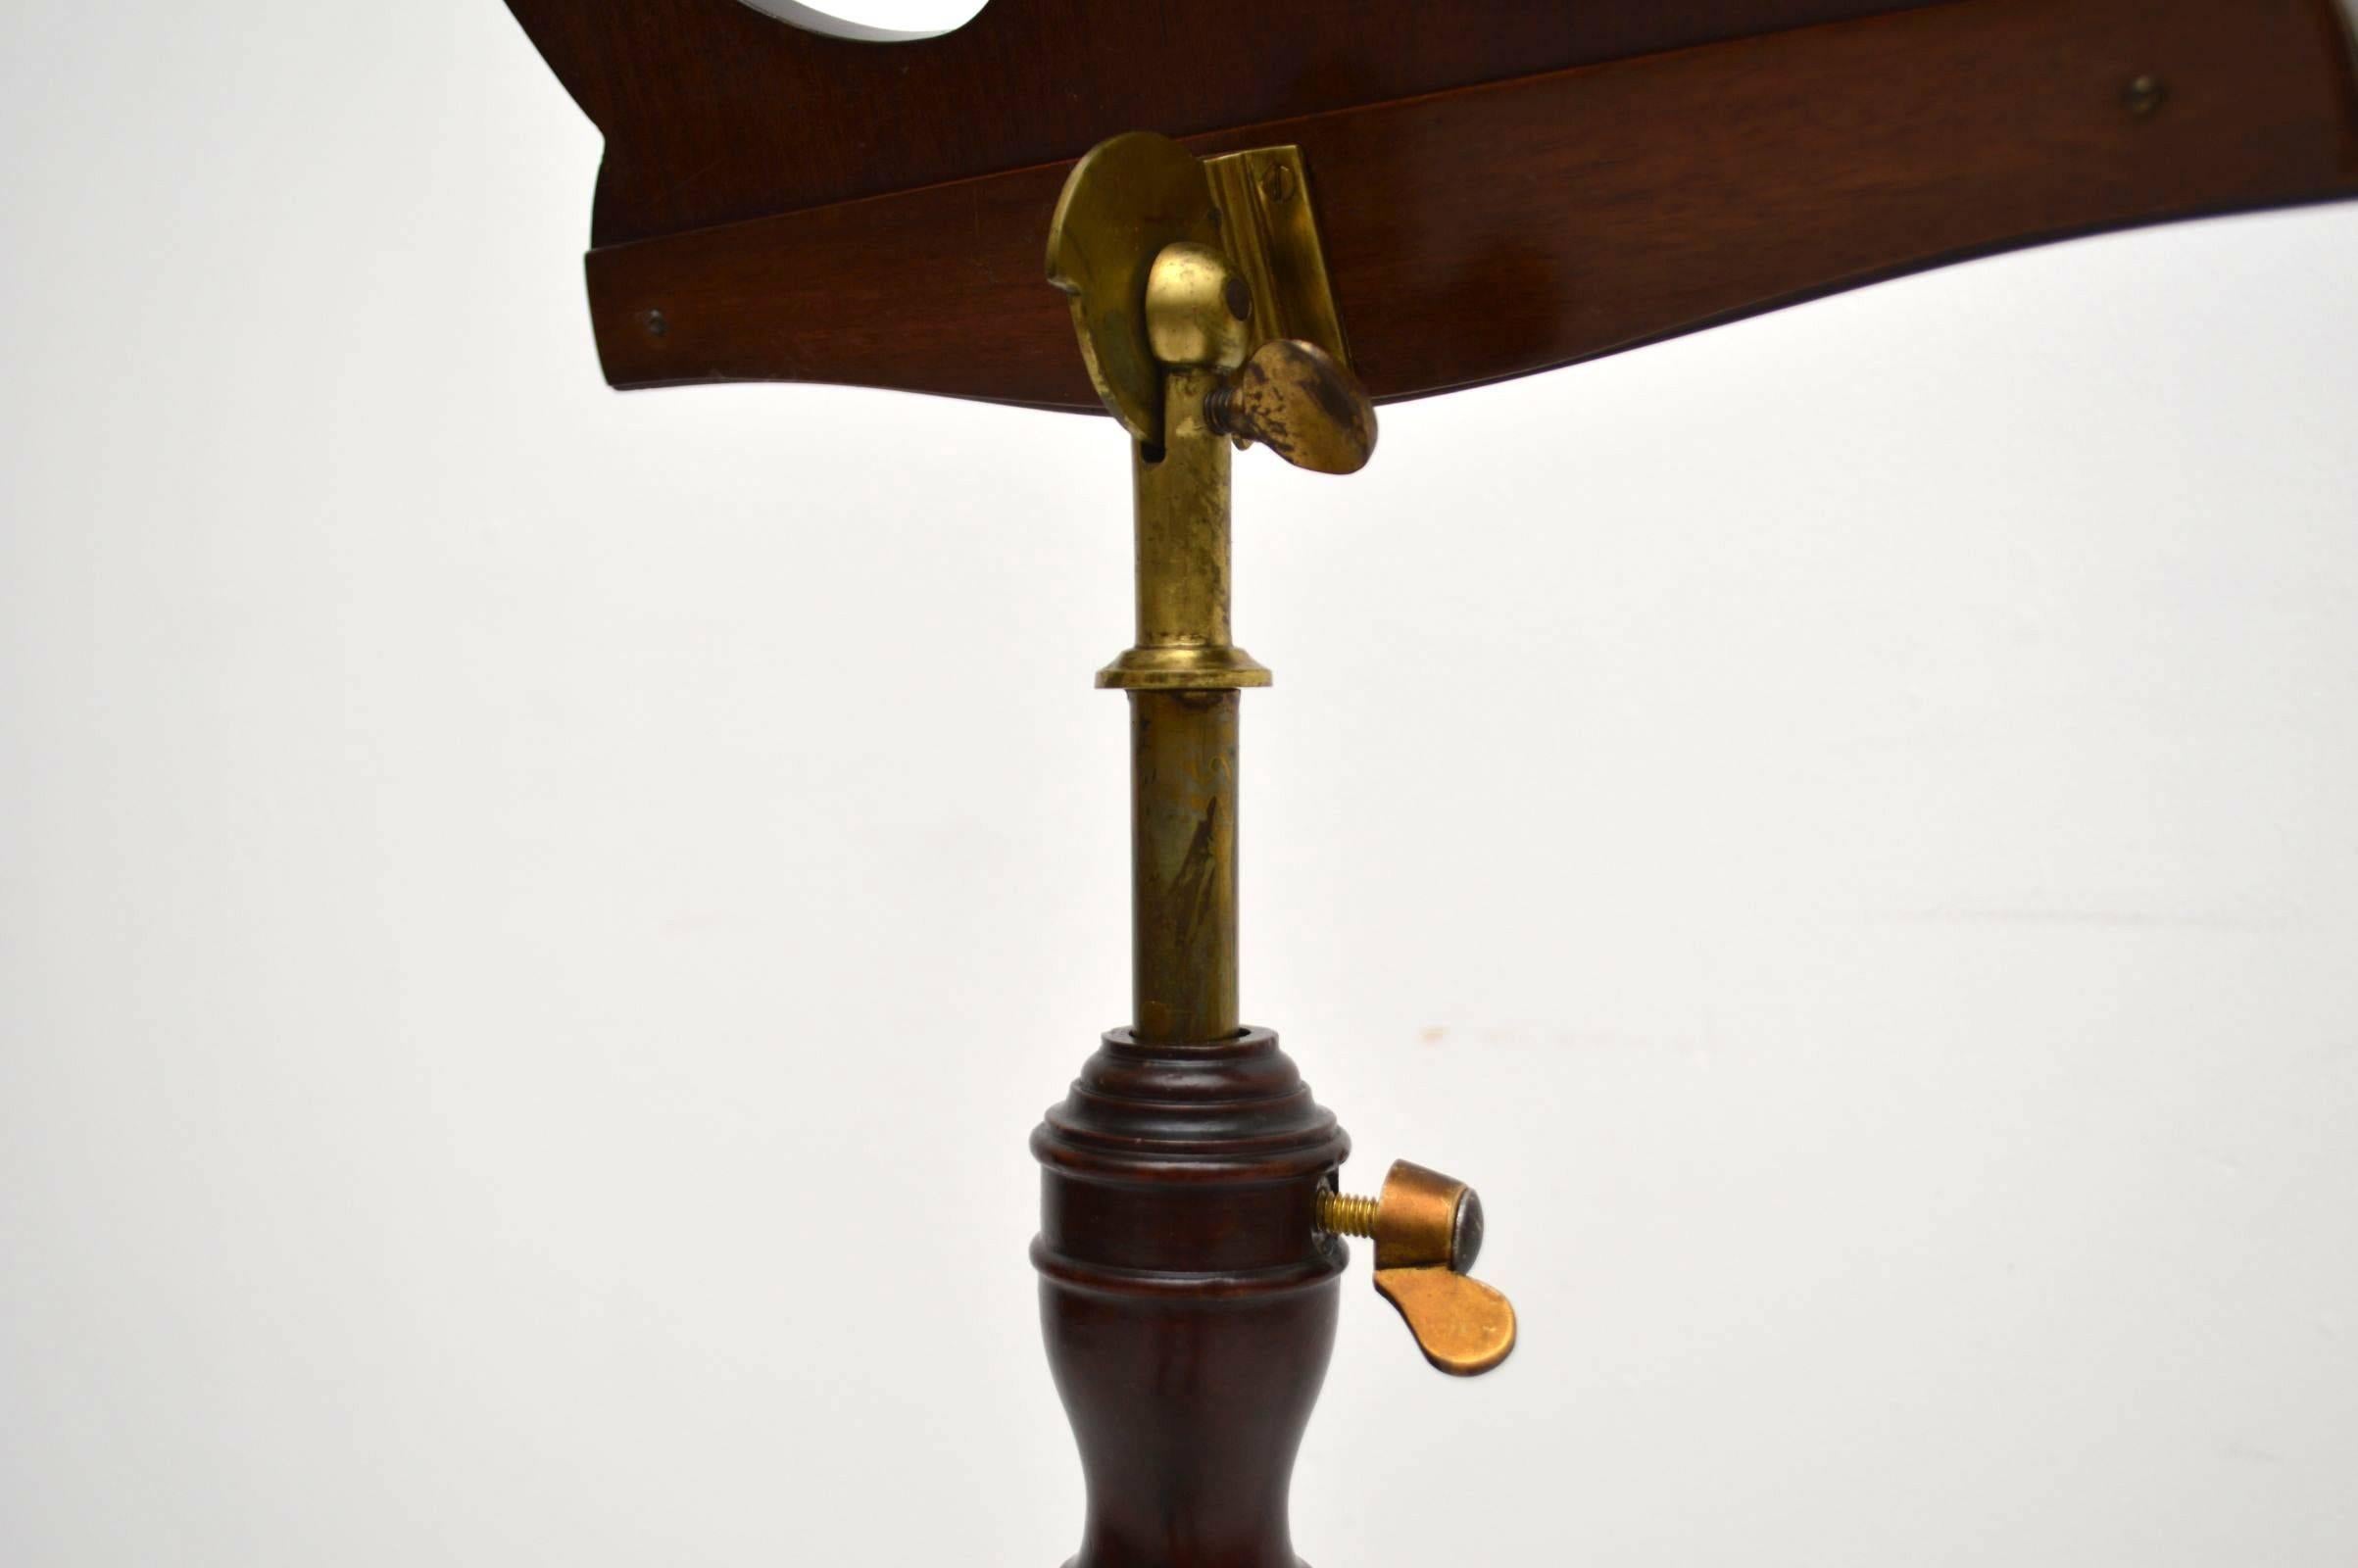 Original antique Regency adjustable music stand in mahogany with brass fittings. This is very rare item is in excellent original condition and is very stylish for that period. The top section is adjustable and also can be raised up and down. The top